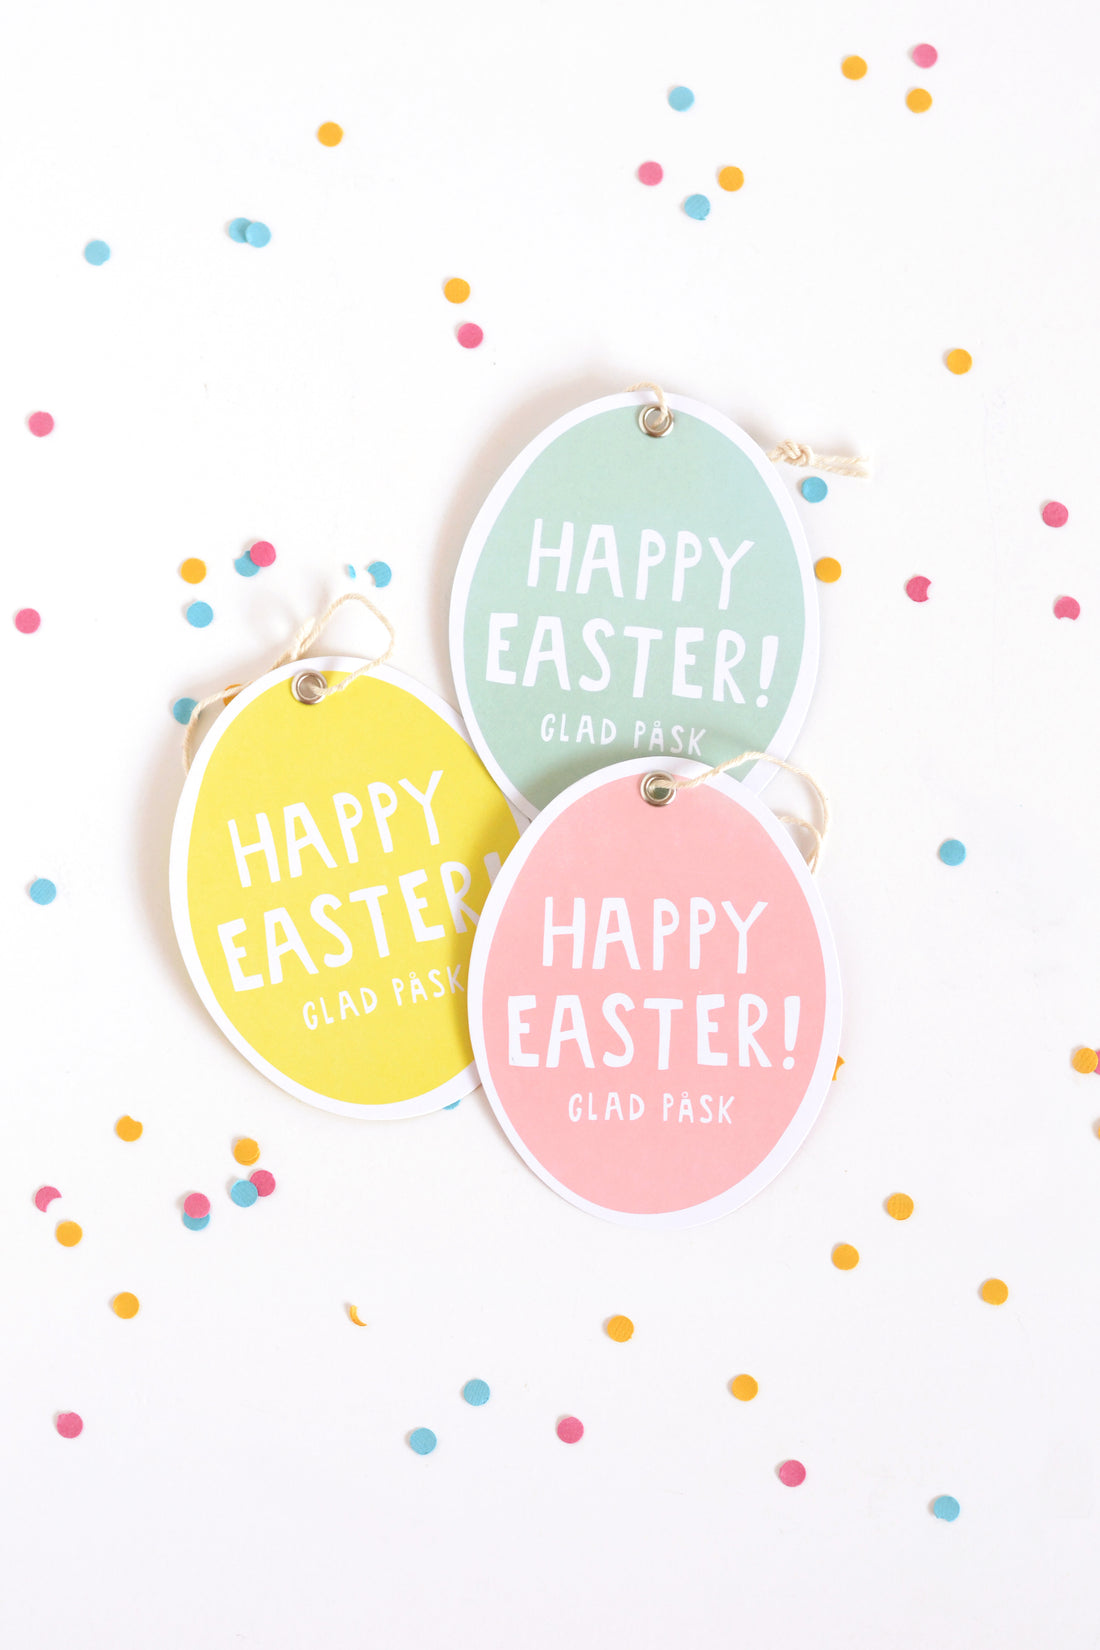 This + that | Happy Easter!